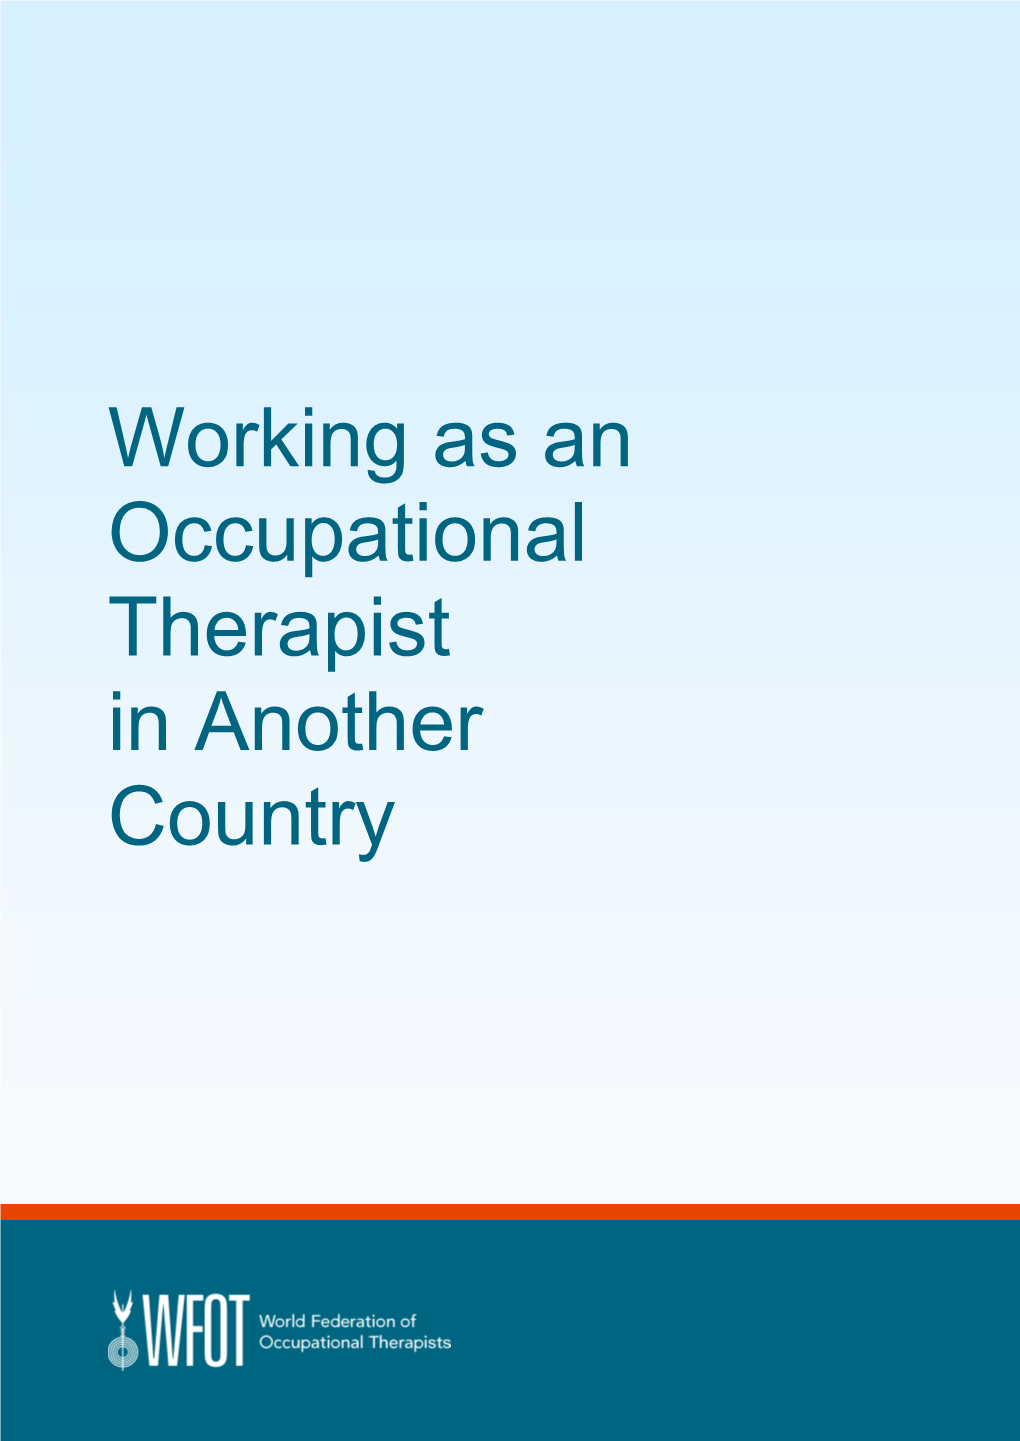 Working As an Occupational Therapist in Another Country